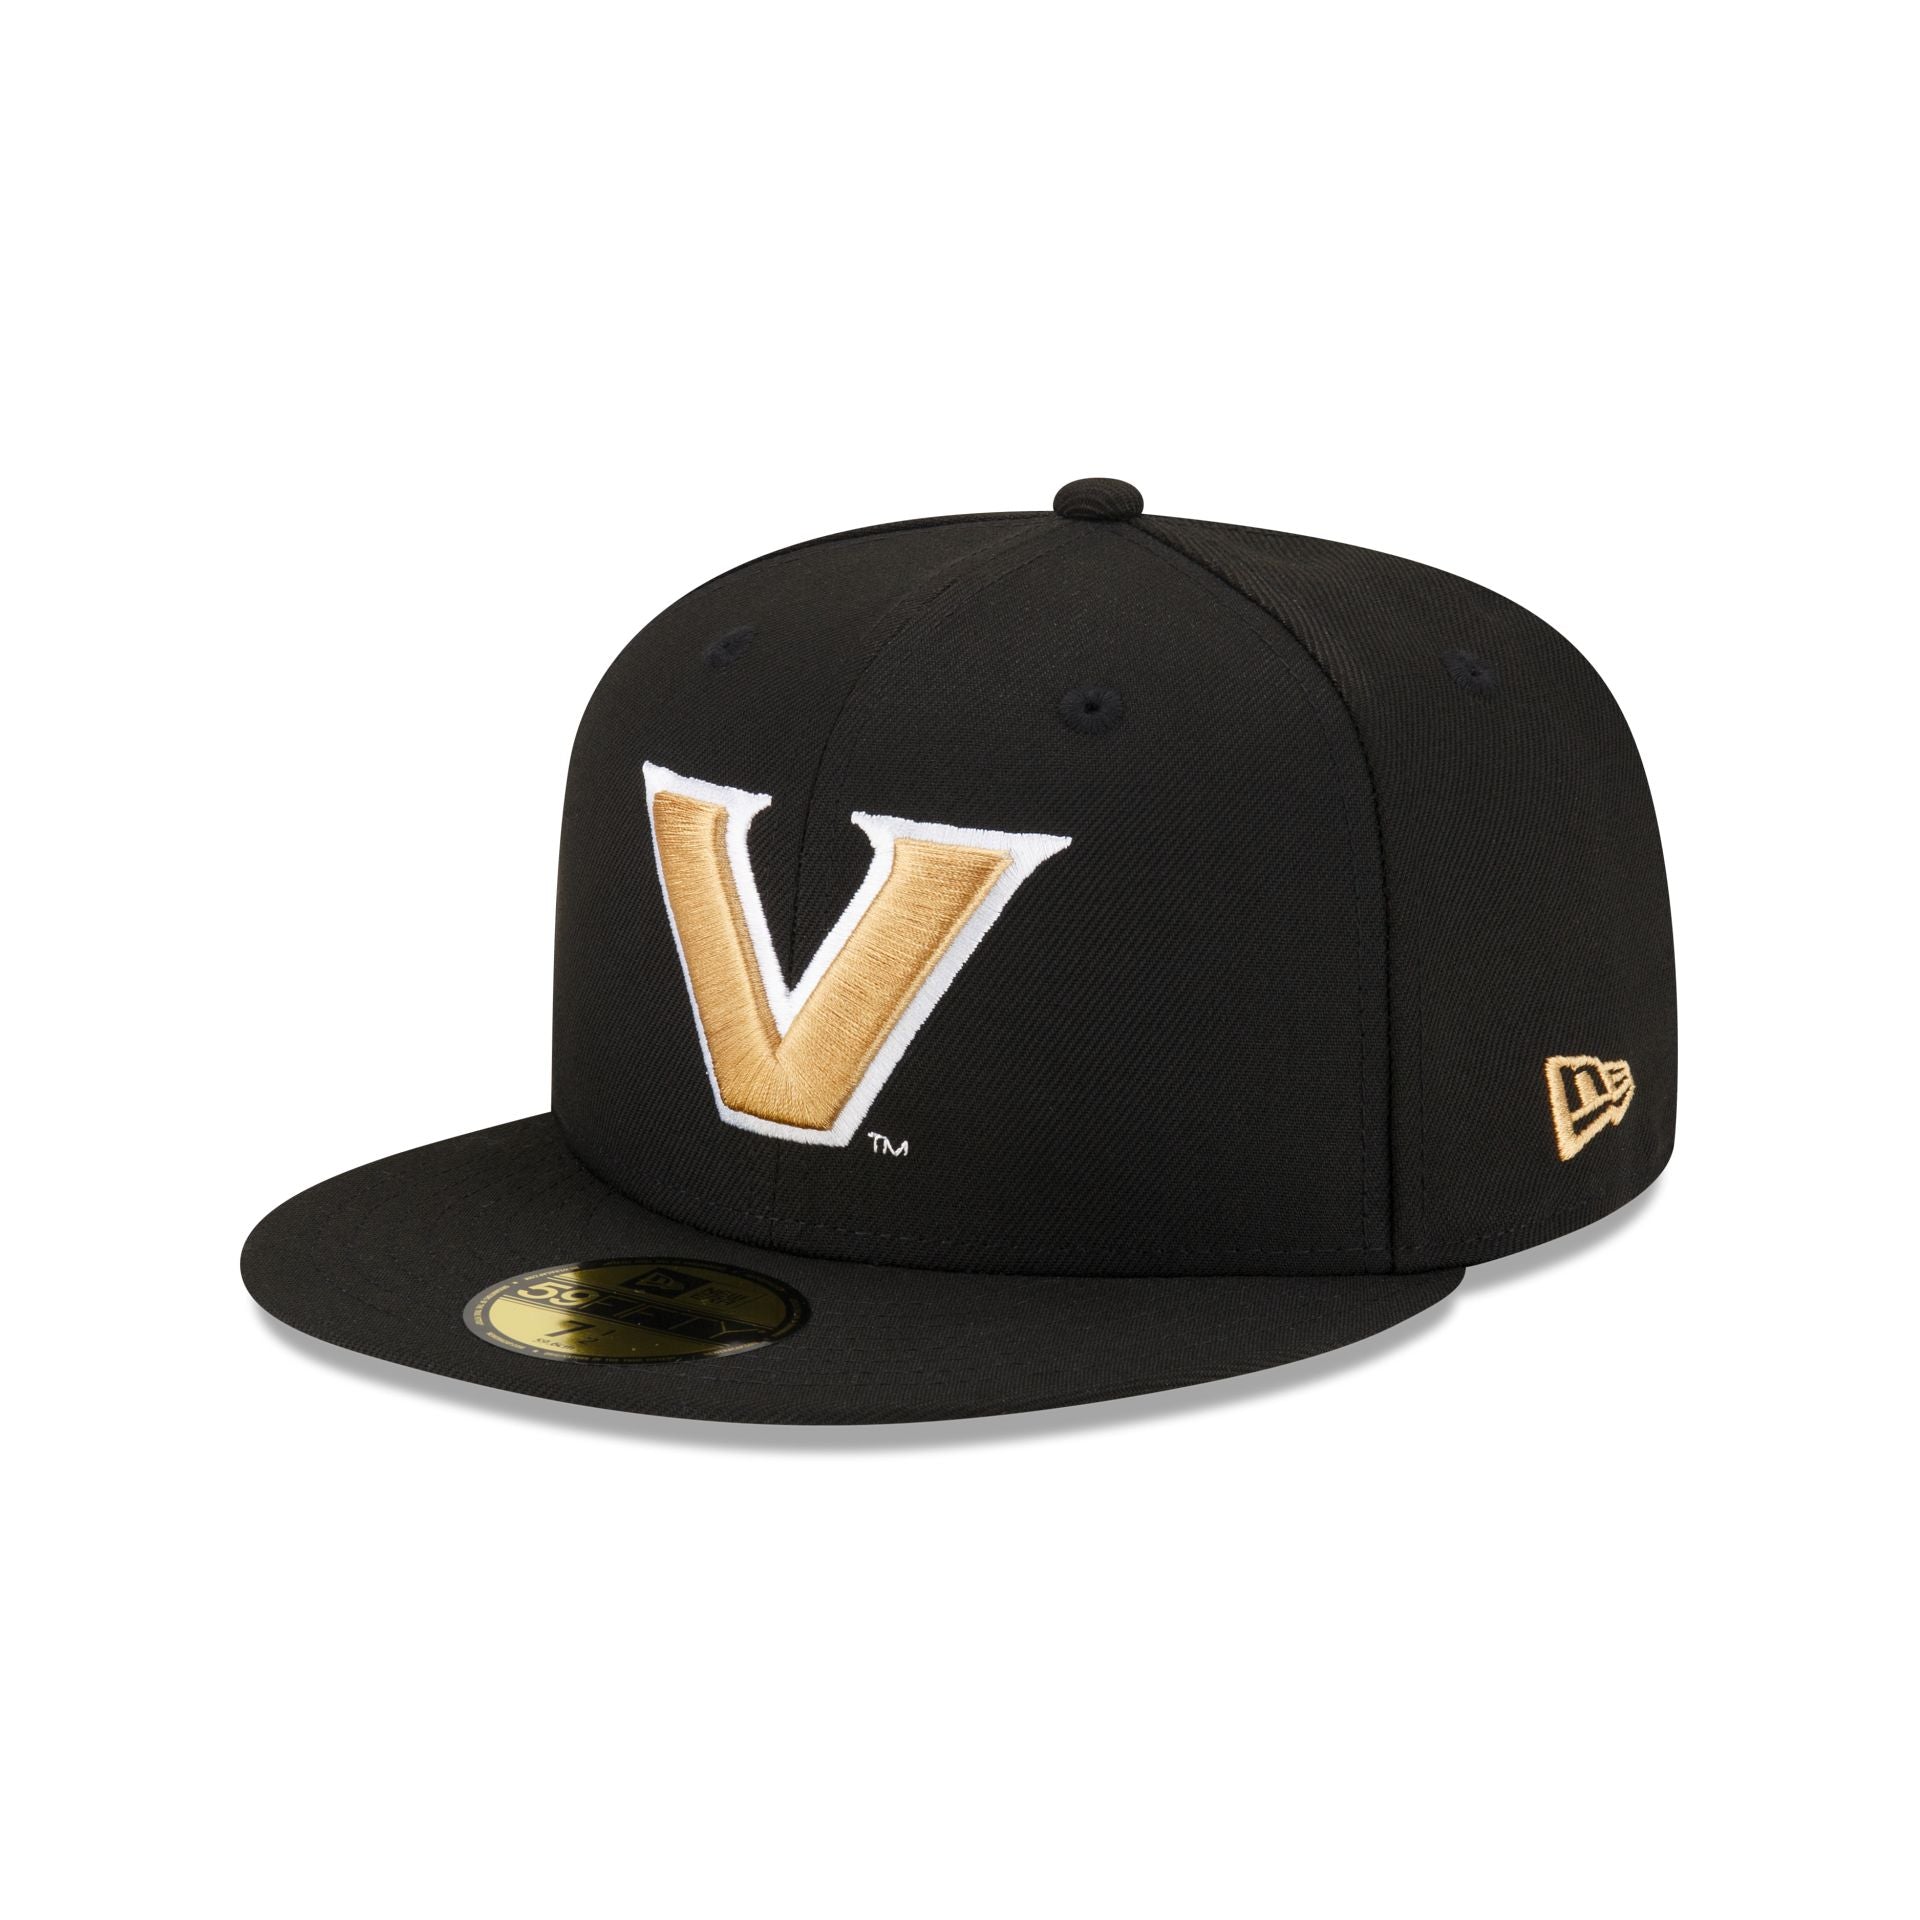 Vanderbilt Commodores 59FIFTY Fitted Hat, Black - Size: 7 1/8, by New Era